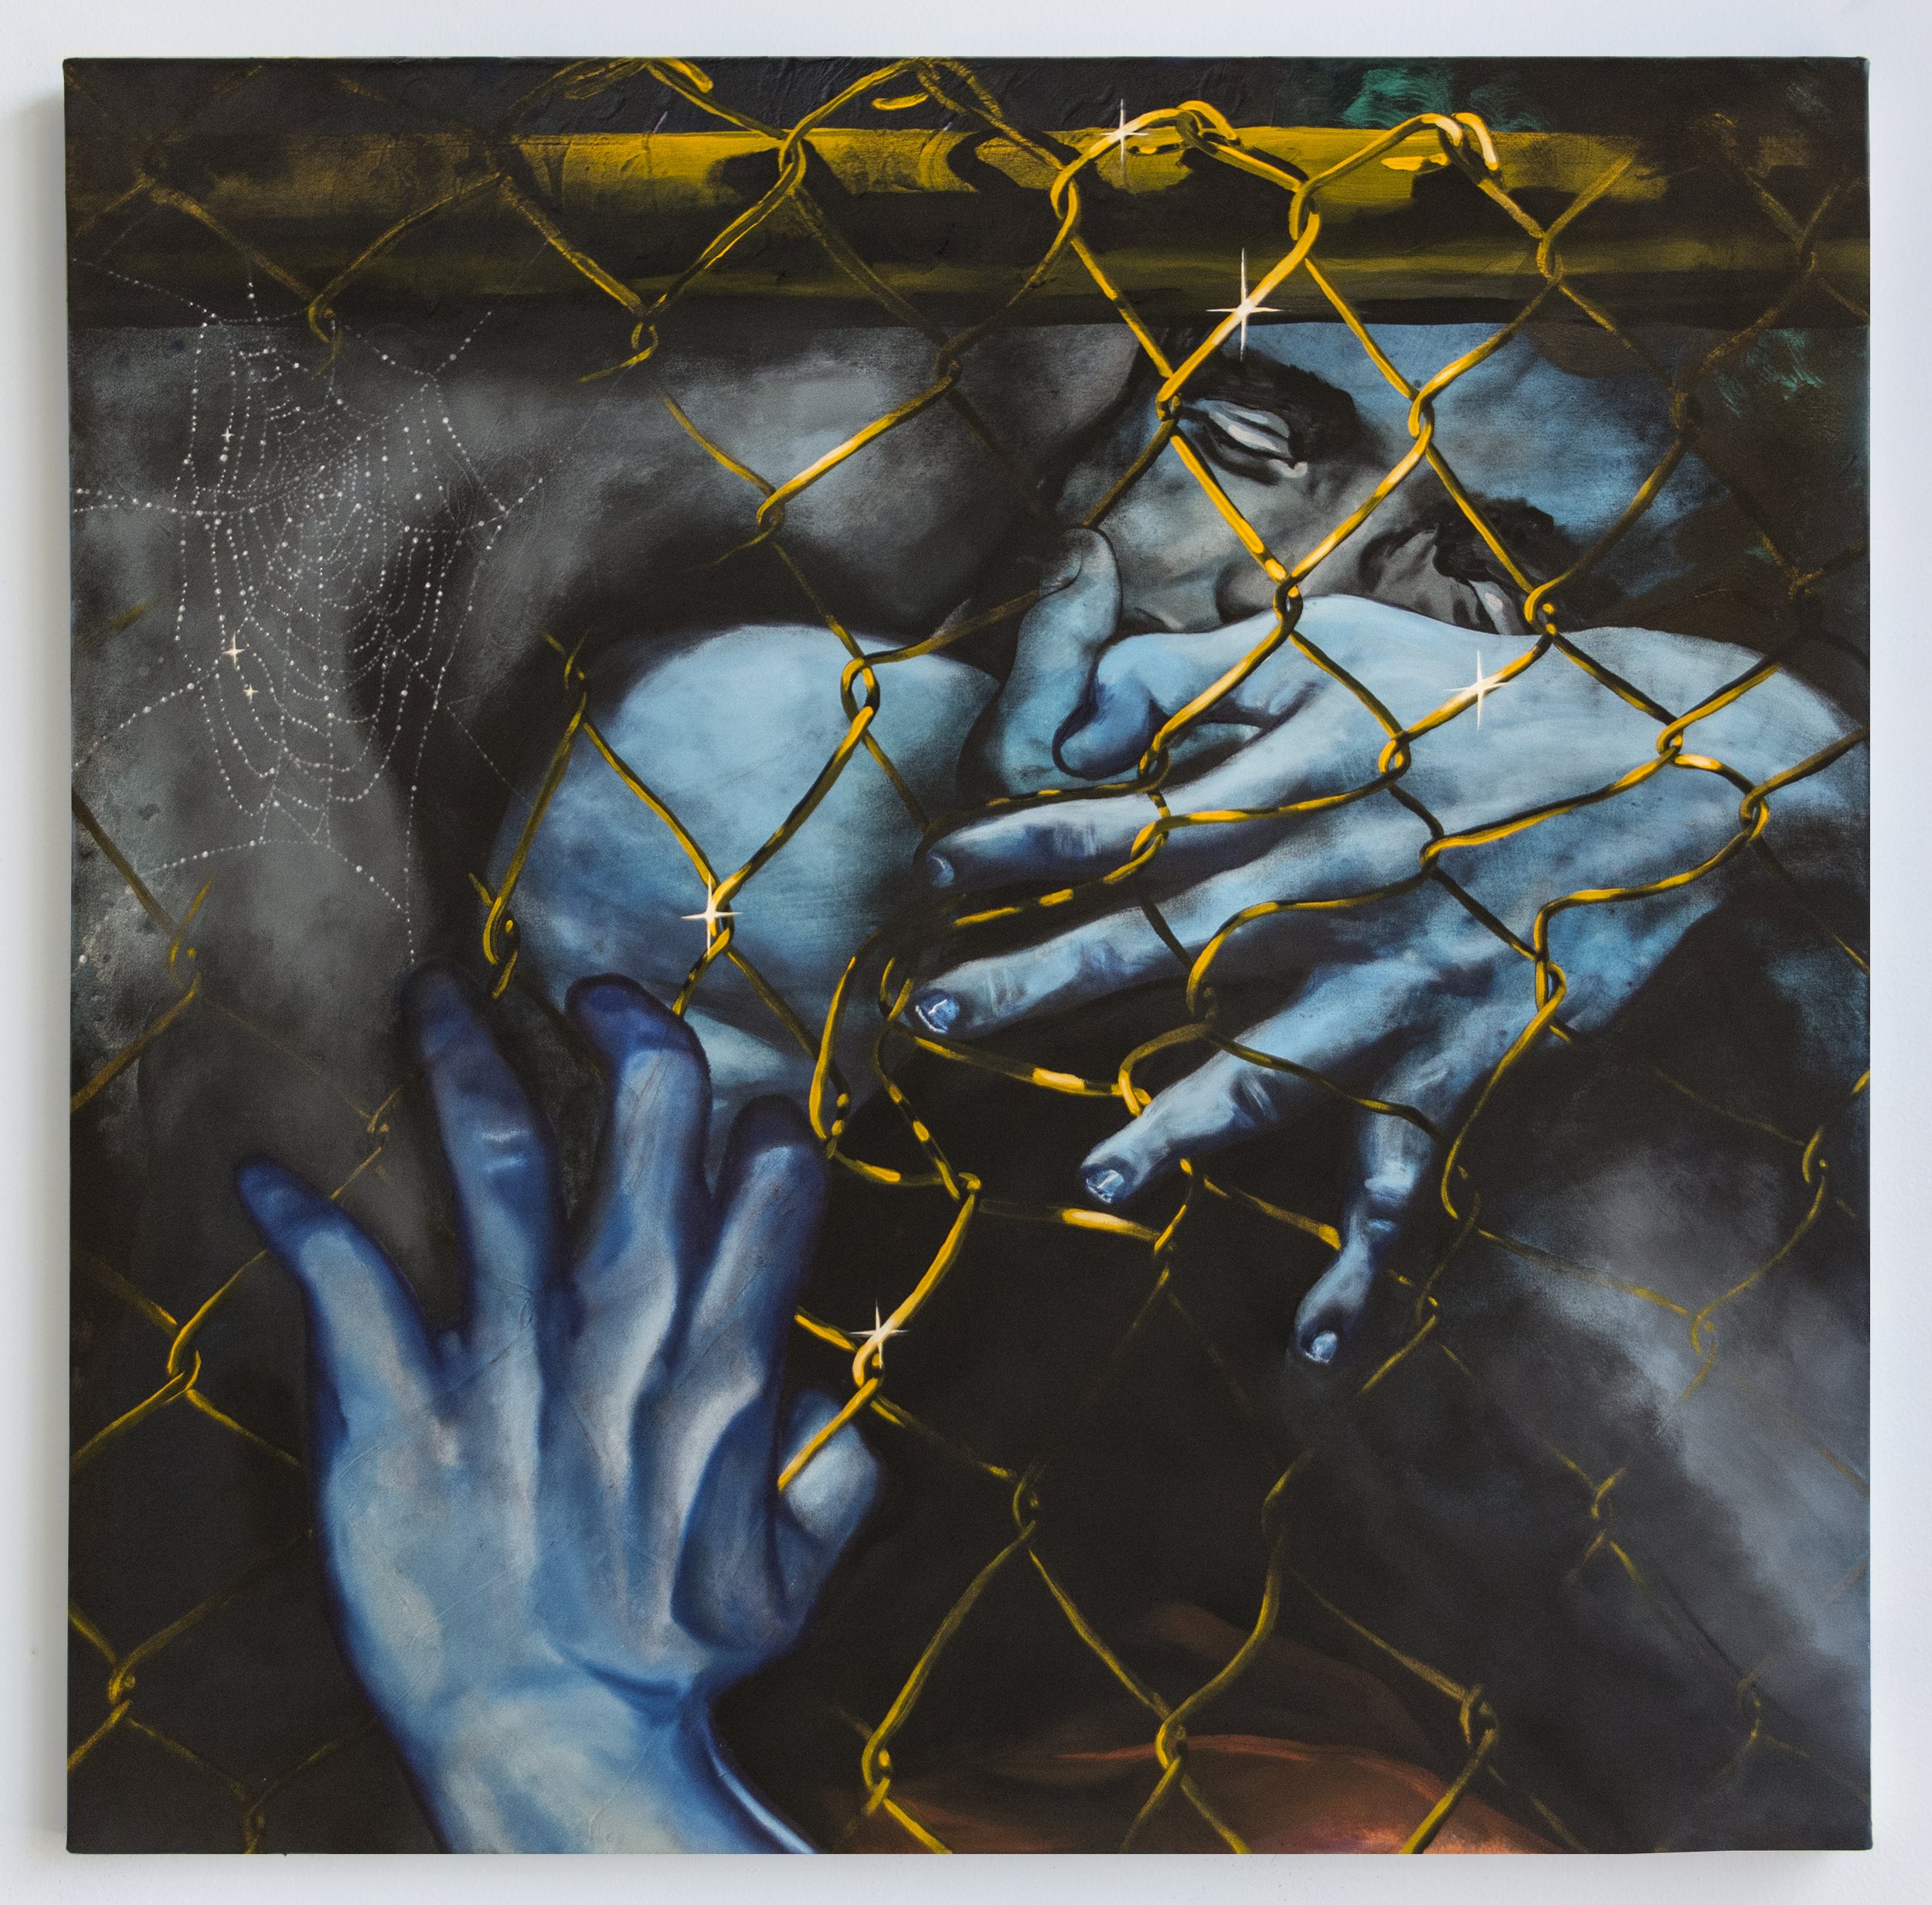   The Entangled   acrylic, oil, and vinyl emulsion on canvas  36 x 36 in / 91.5 x 91.5 cm 